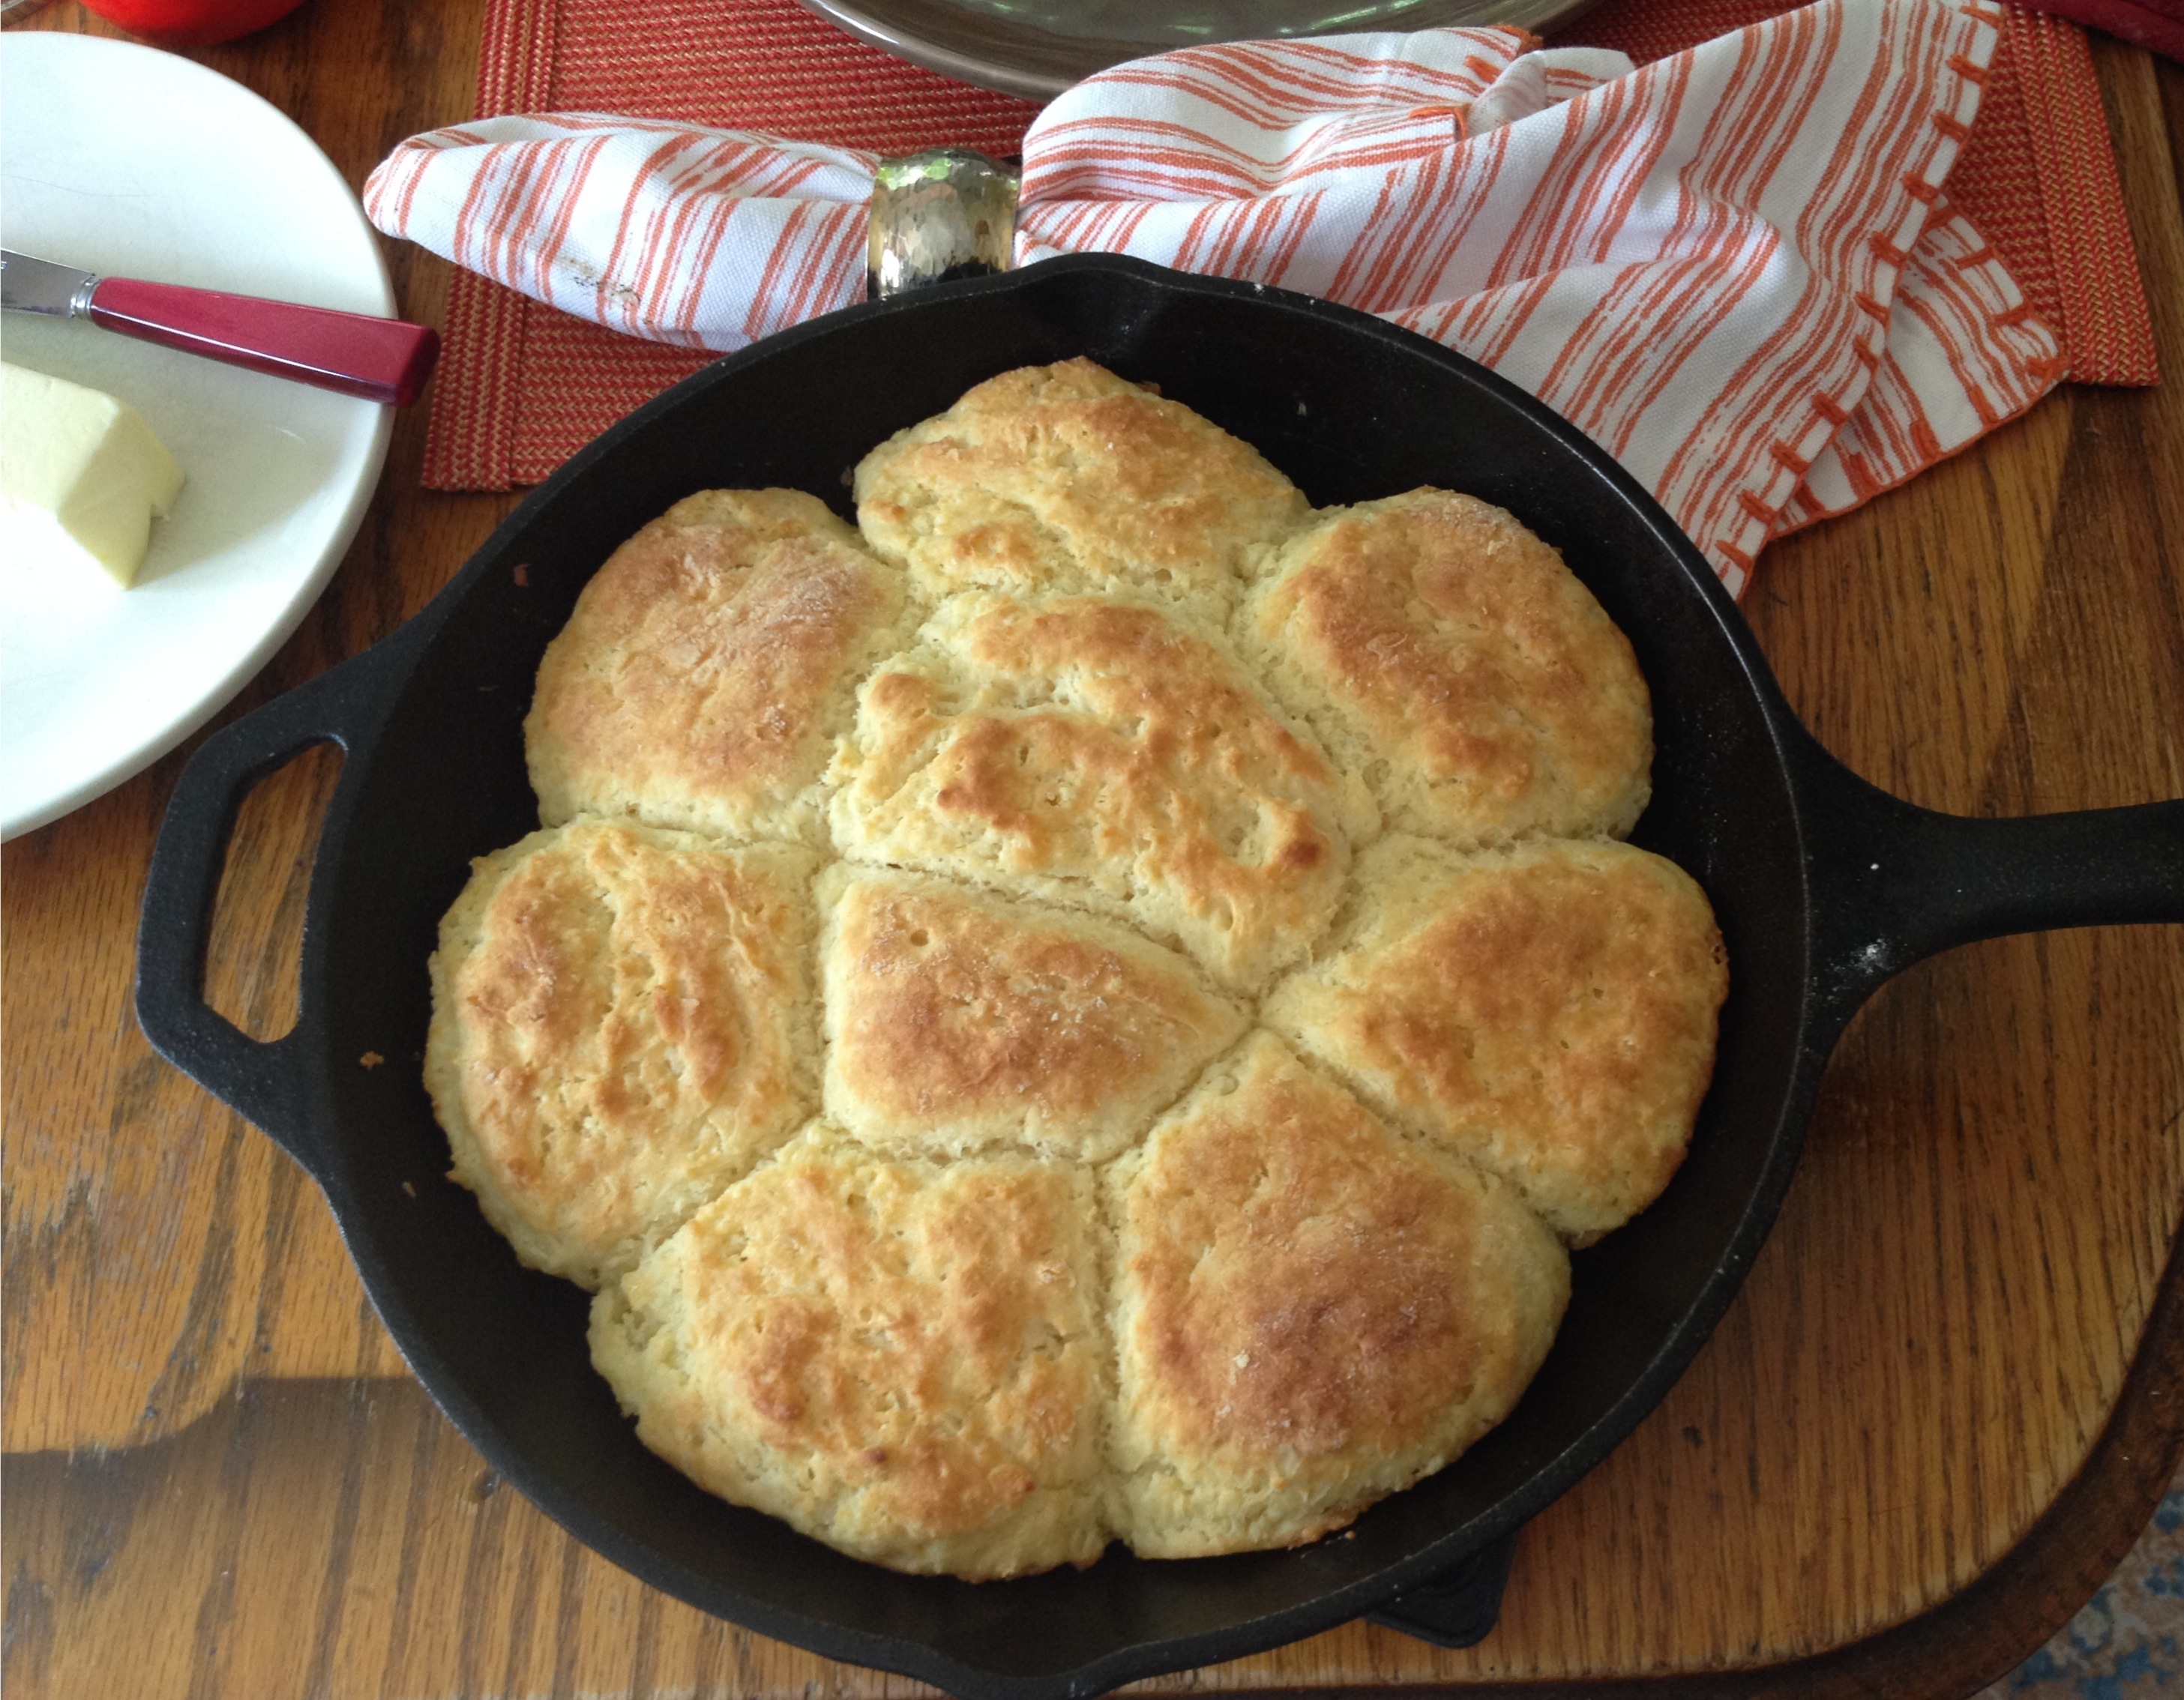 https://lovethesecretingredient.net/wp-content/uploads/2014/09/Best-Biscuits-in-a-skillet-Photo-from-Aug-3-2014.jpeg